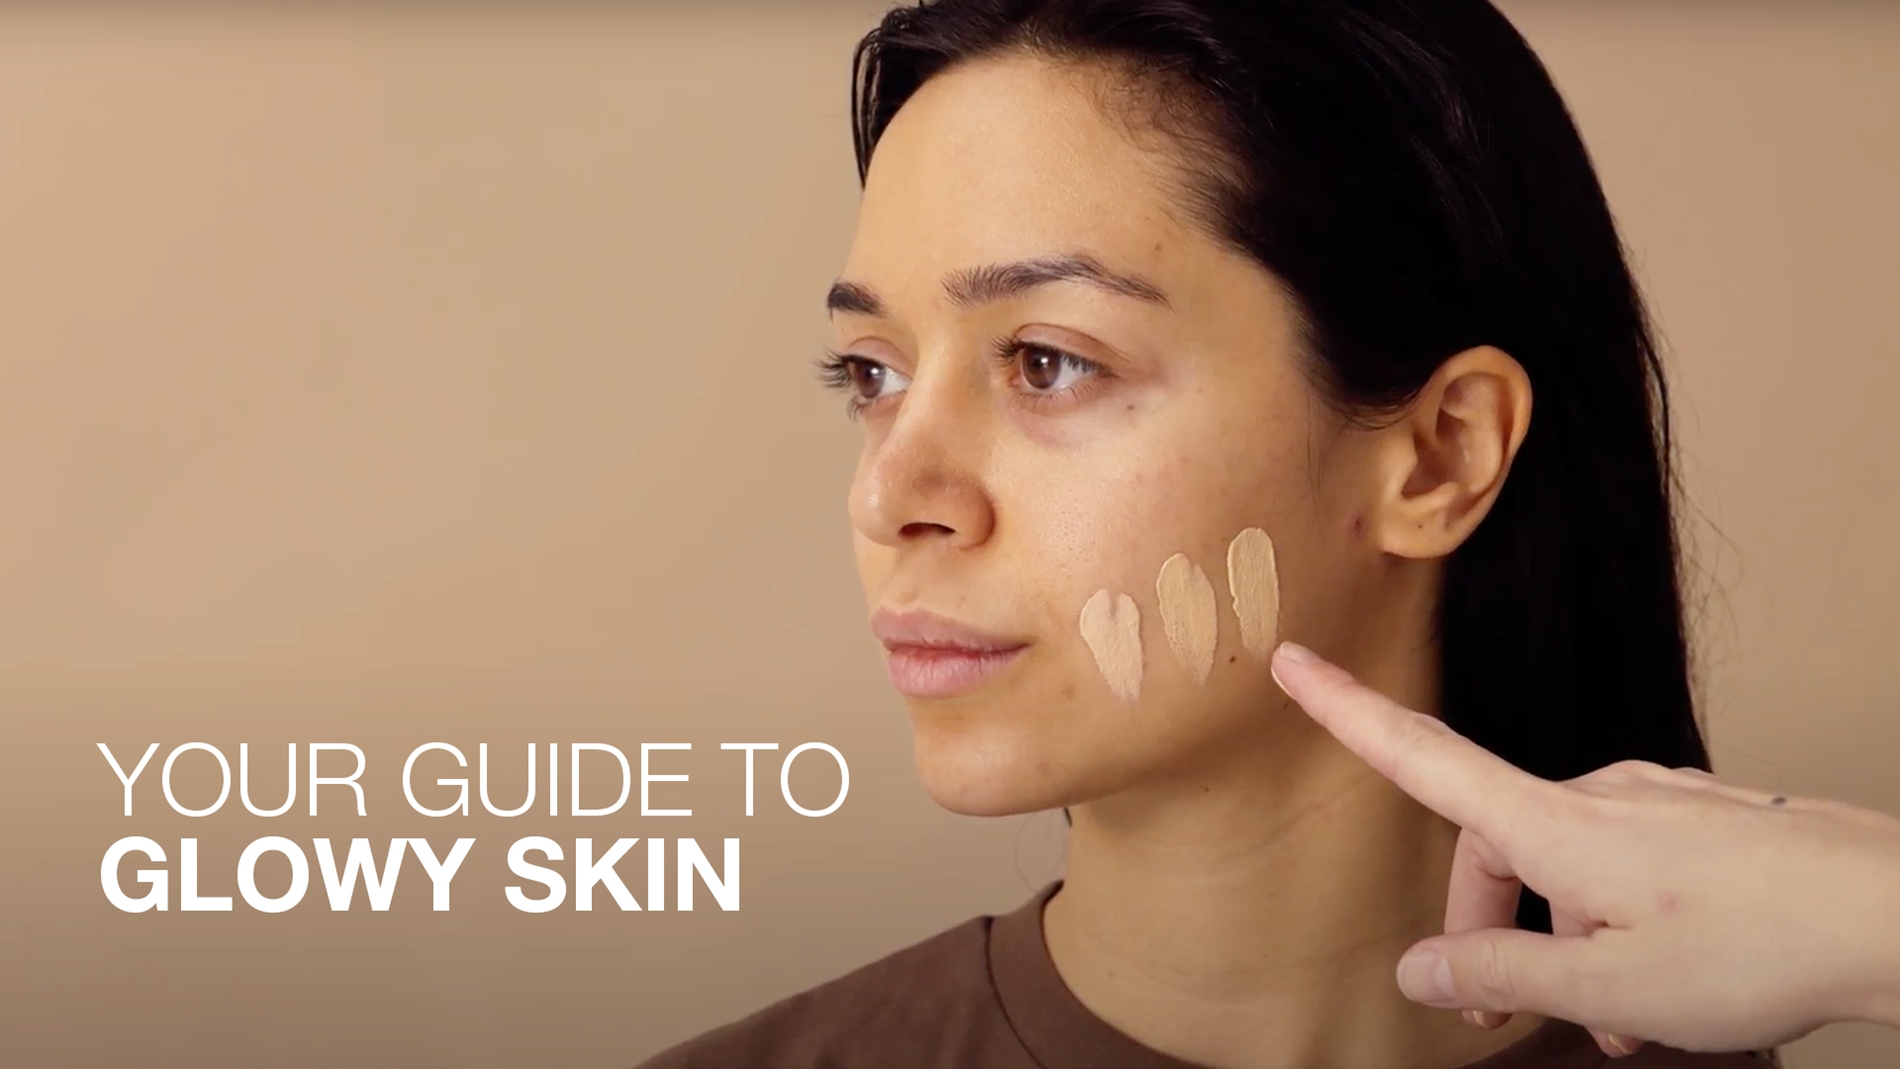 Step by step guide - How to apply concealer and foundation